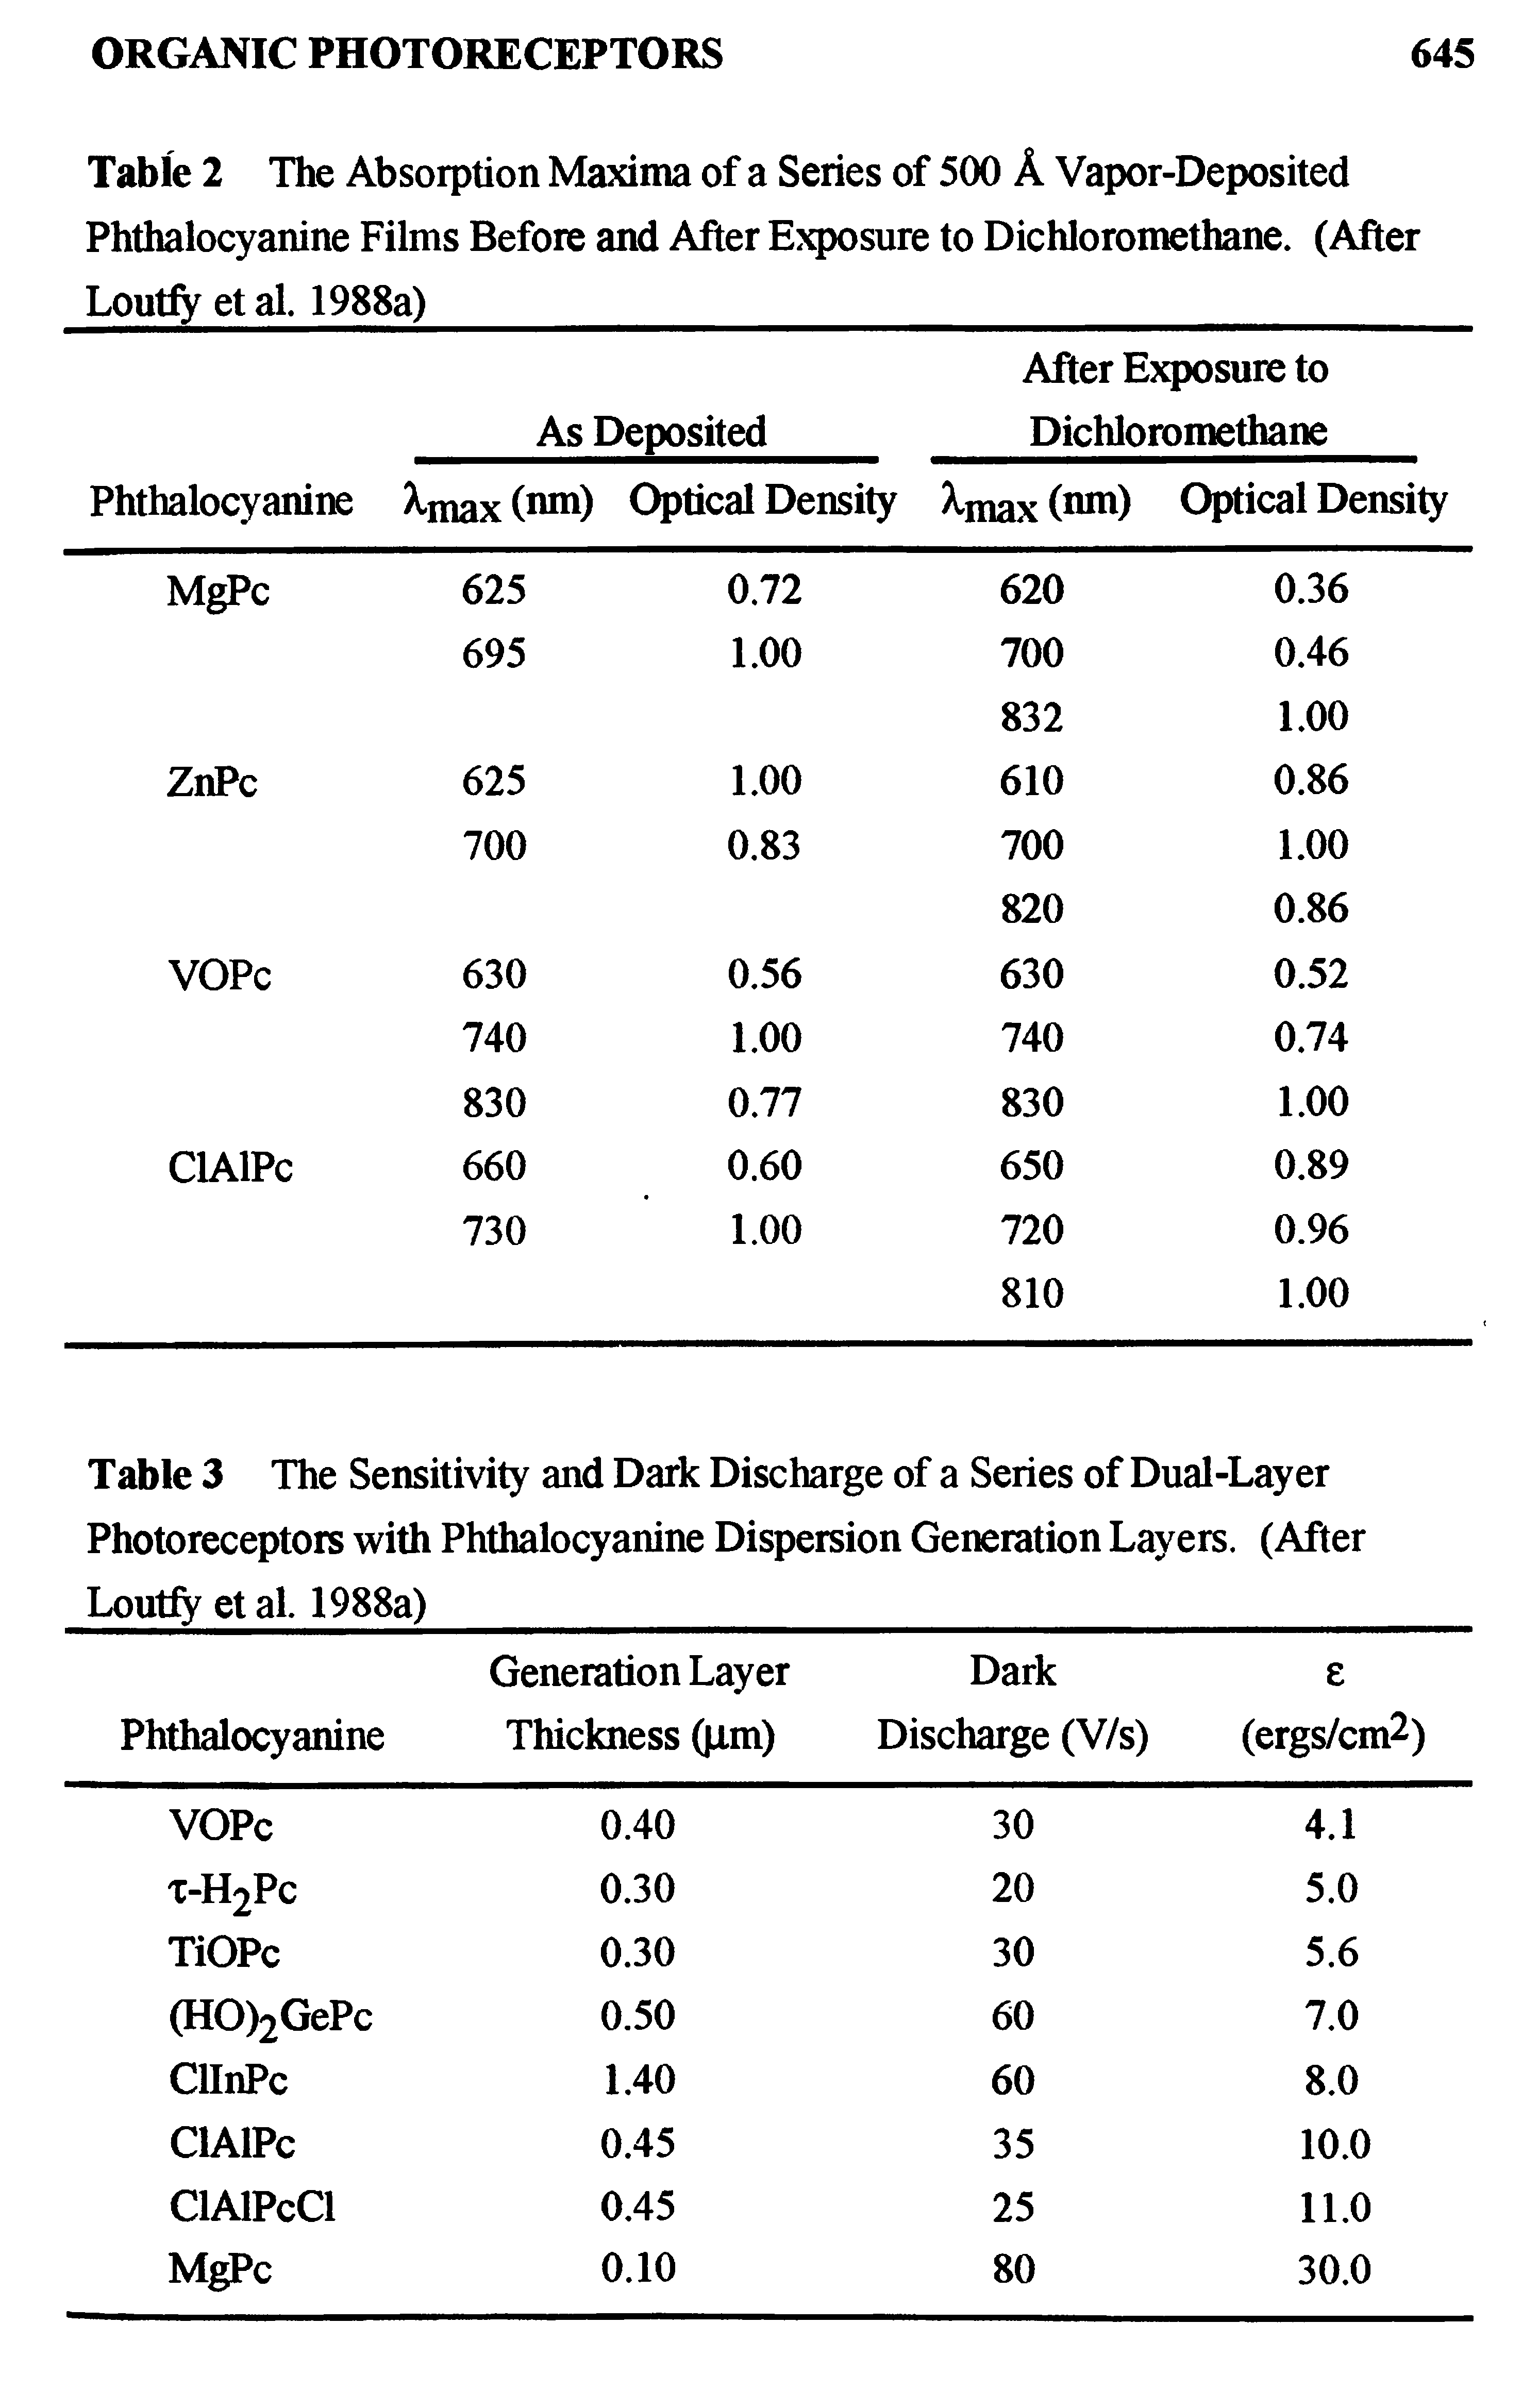 Table 2 The Absorption Maxima of a Series of 500 A Vapor-Deposited Phthalocyanine Films Before and After Exposure to Dichloromethane. (After Loutfy et al. 1988a) ...